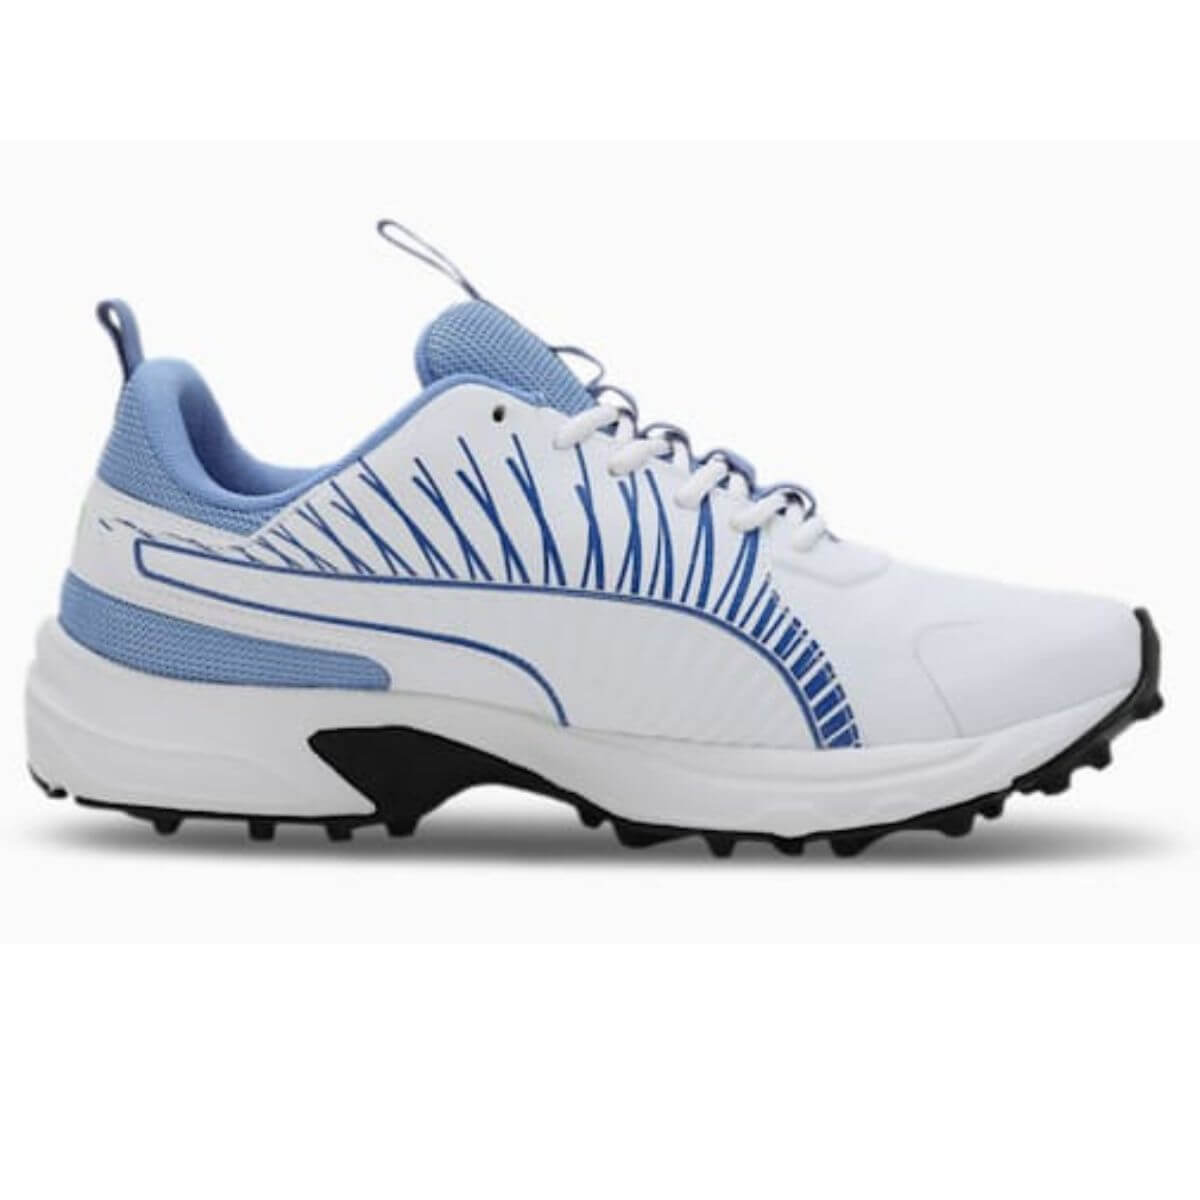 Buy Running Shoes For Men: Europa-Mod-Blu-Mstd | Campus Shoes